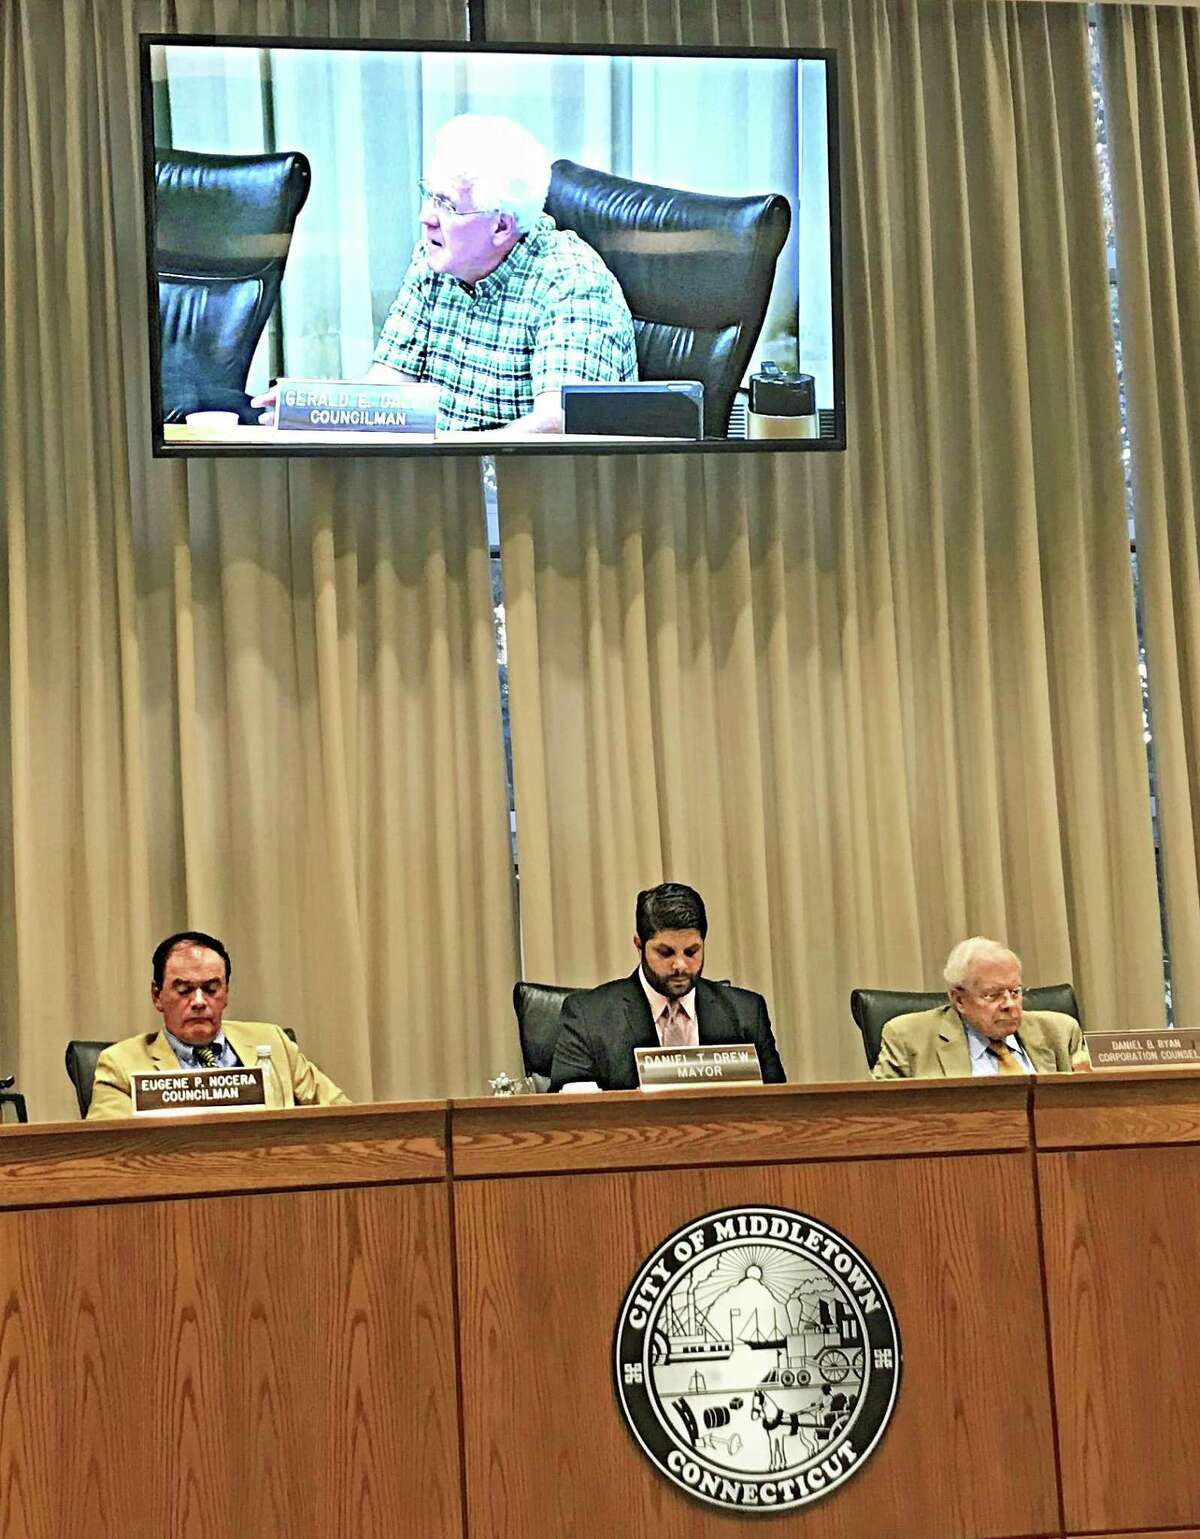 From left, Middletown Common Councilman Gene Nocera, Mayor Dan Drew, and corporate counsel Daniel Ryan hear from the independent investigator charged with conducting a report into a complaint lodged against Drew by a Board of Education employee at the Aug. 13 meeting. On screen is Councilman Gerry Daley.